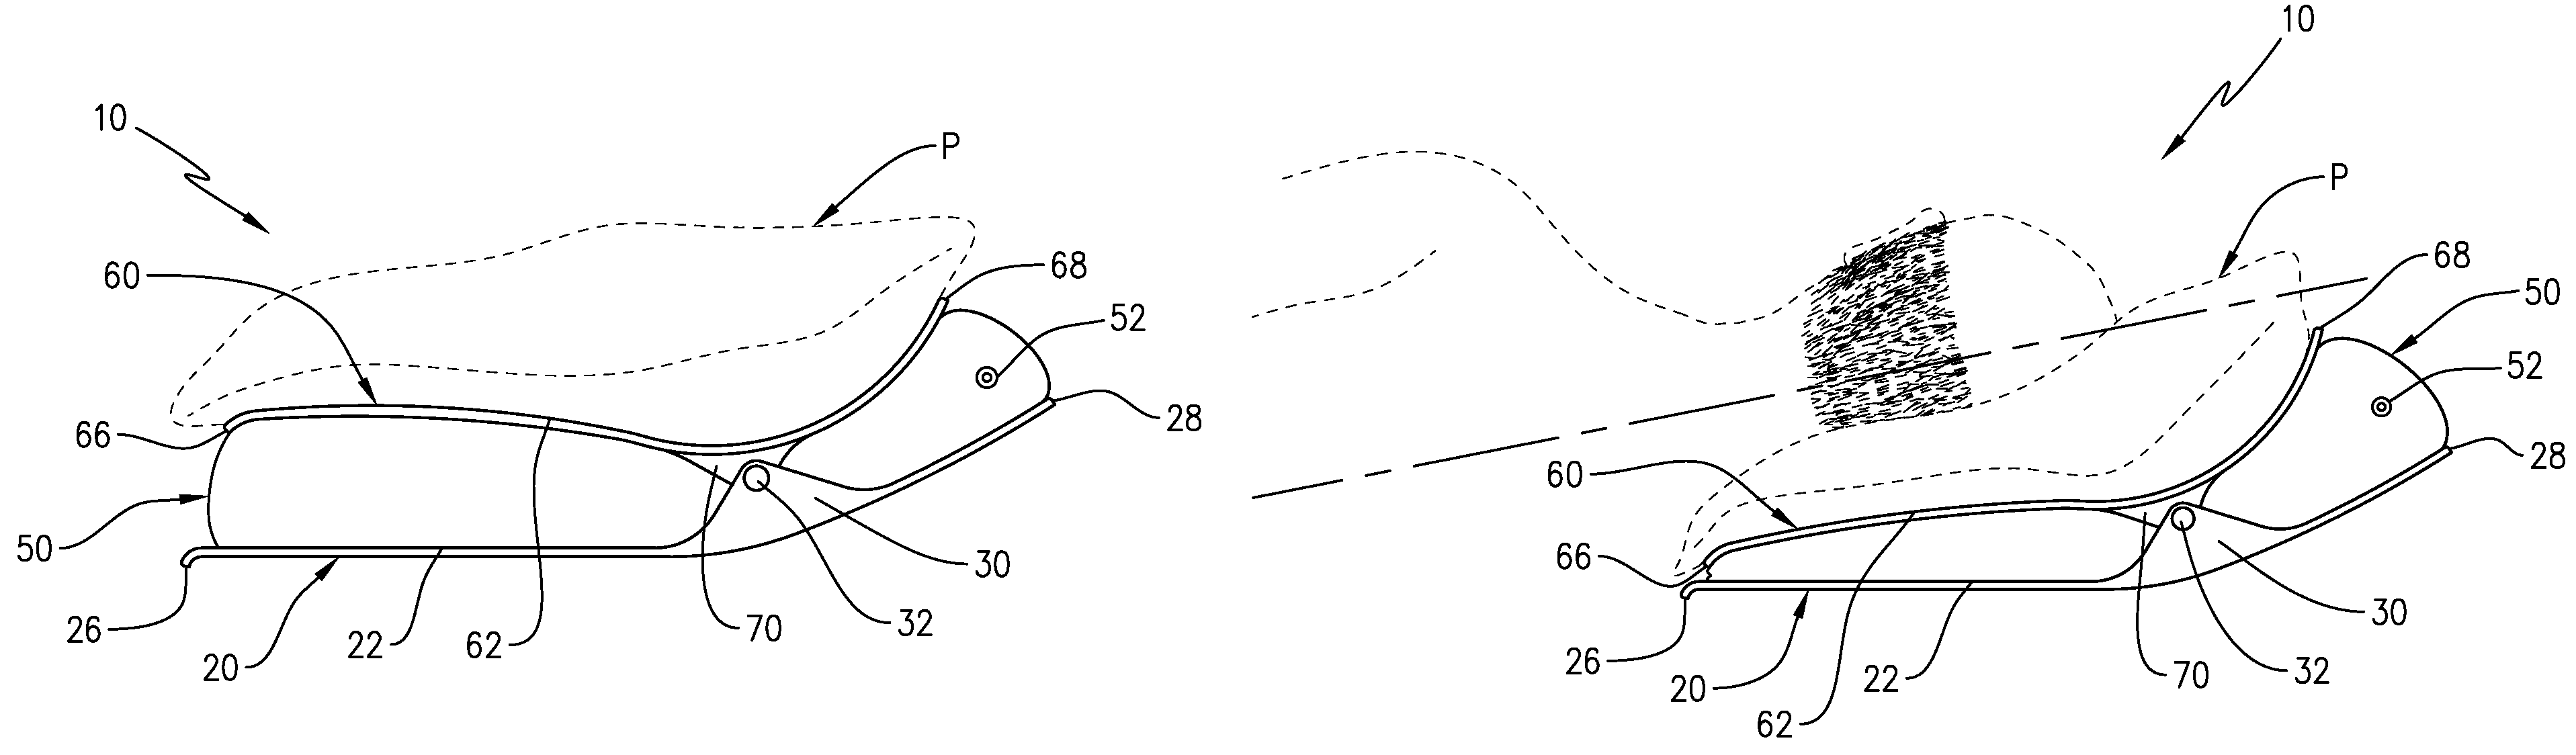 Method with apparatus to prevent baldness and stimulate hair growth